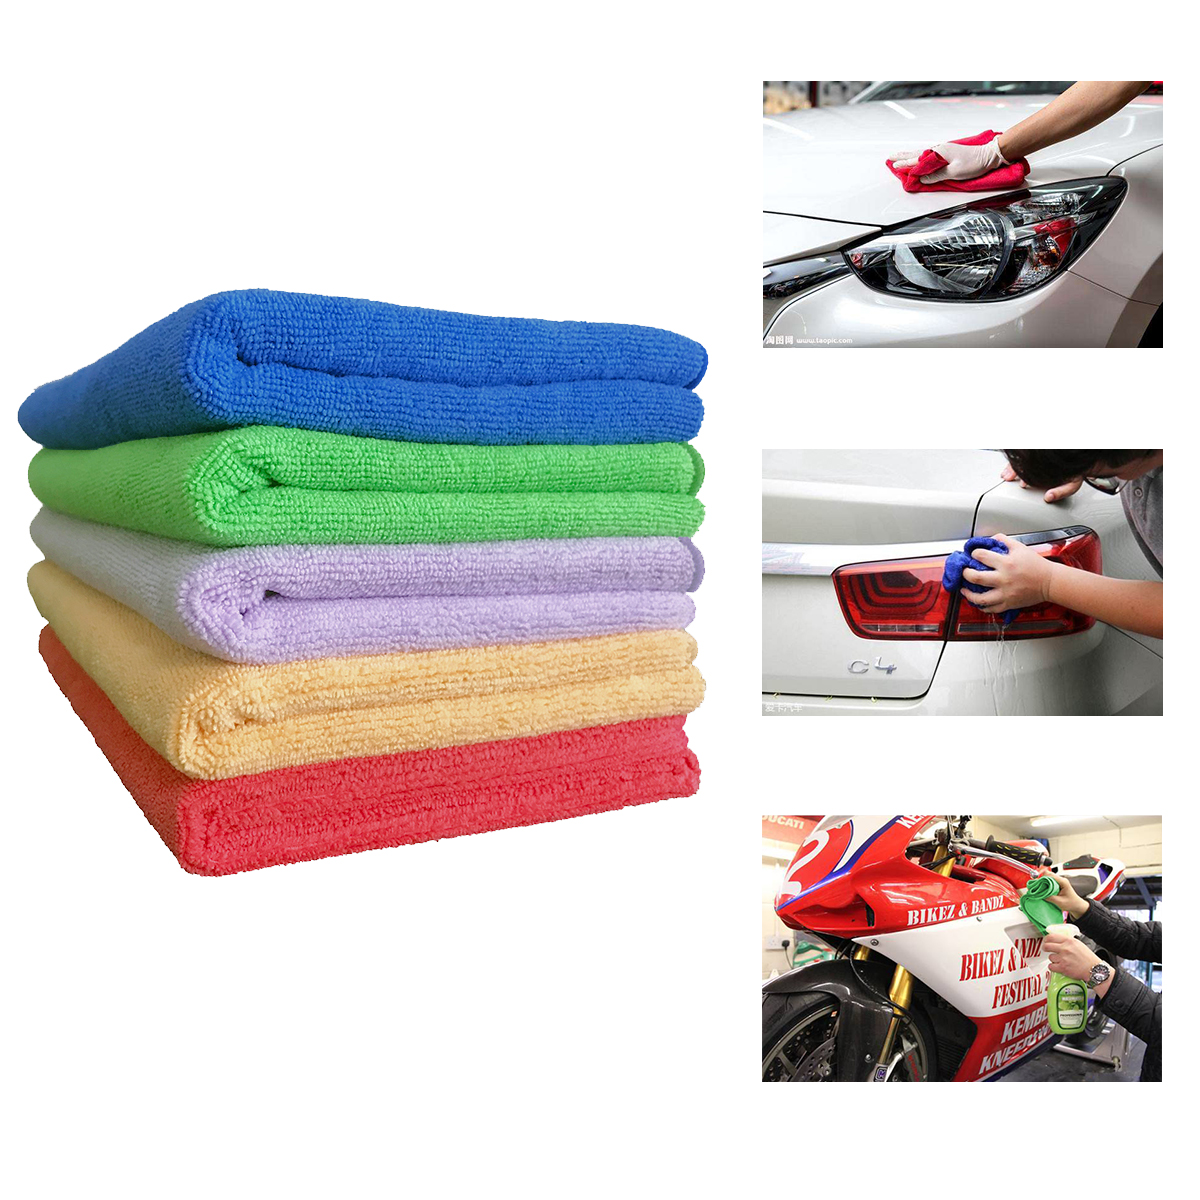 New Delivery for Wholesale Towel Manufacturers - Microfibre cleaning cloth-Multi-purpose-Car cleaning-Vehicle cleaning  – AKTIVKOHLE